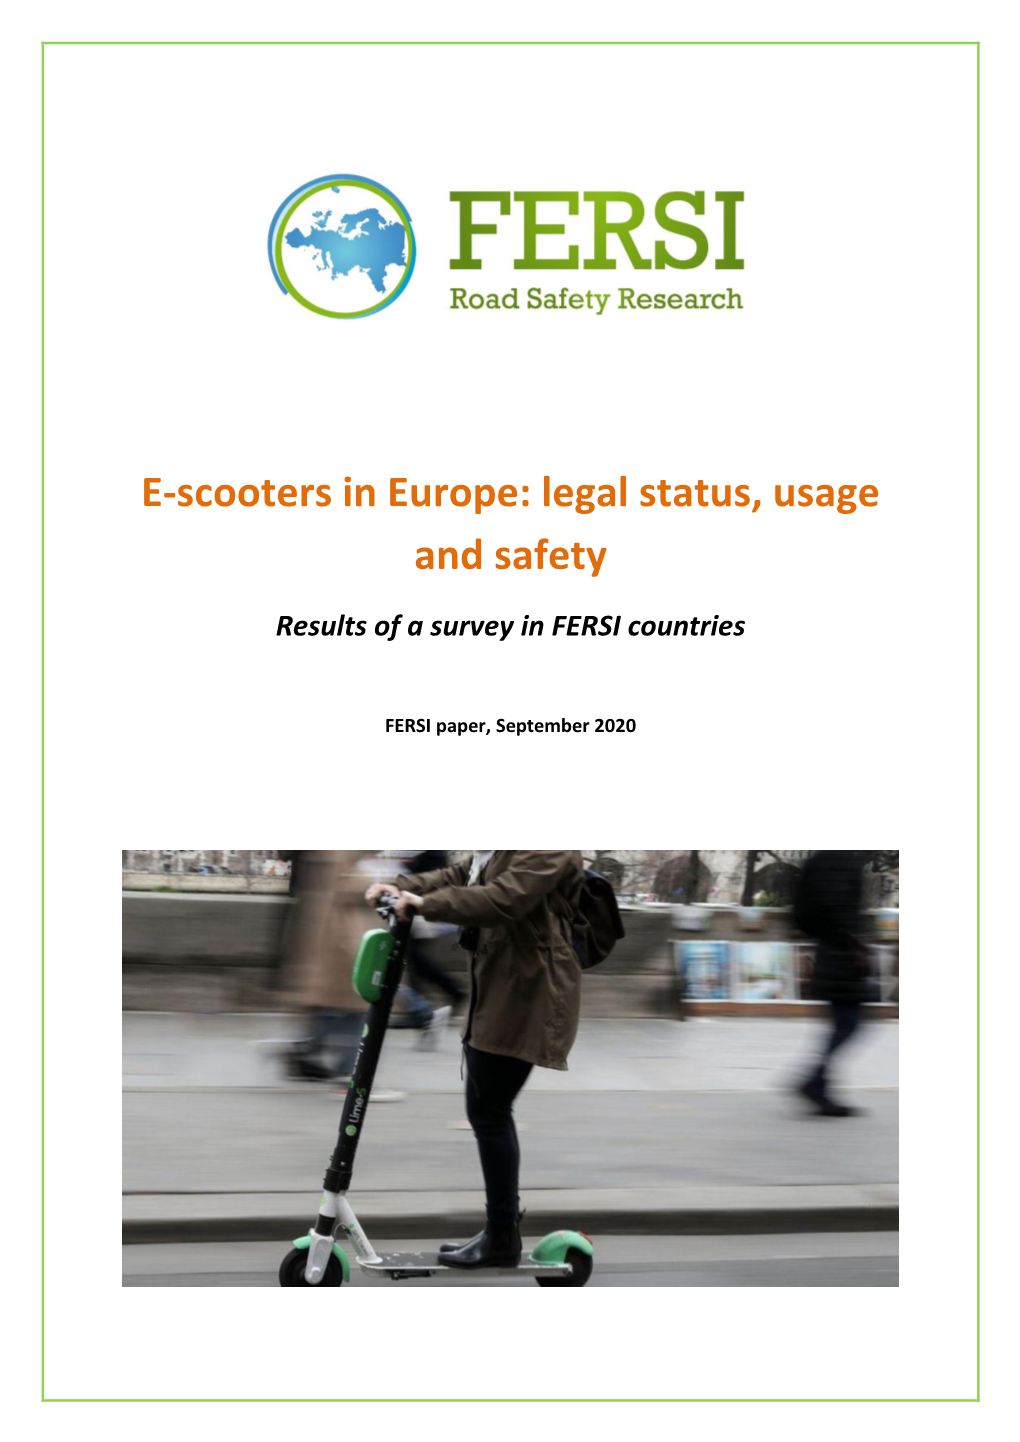 E-Scooters in Europe: Legal Status, Usage and Safety